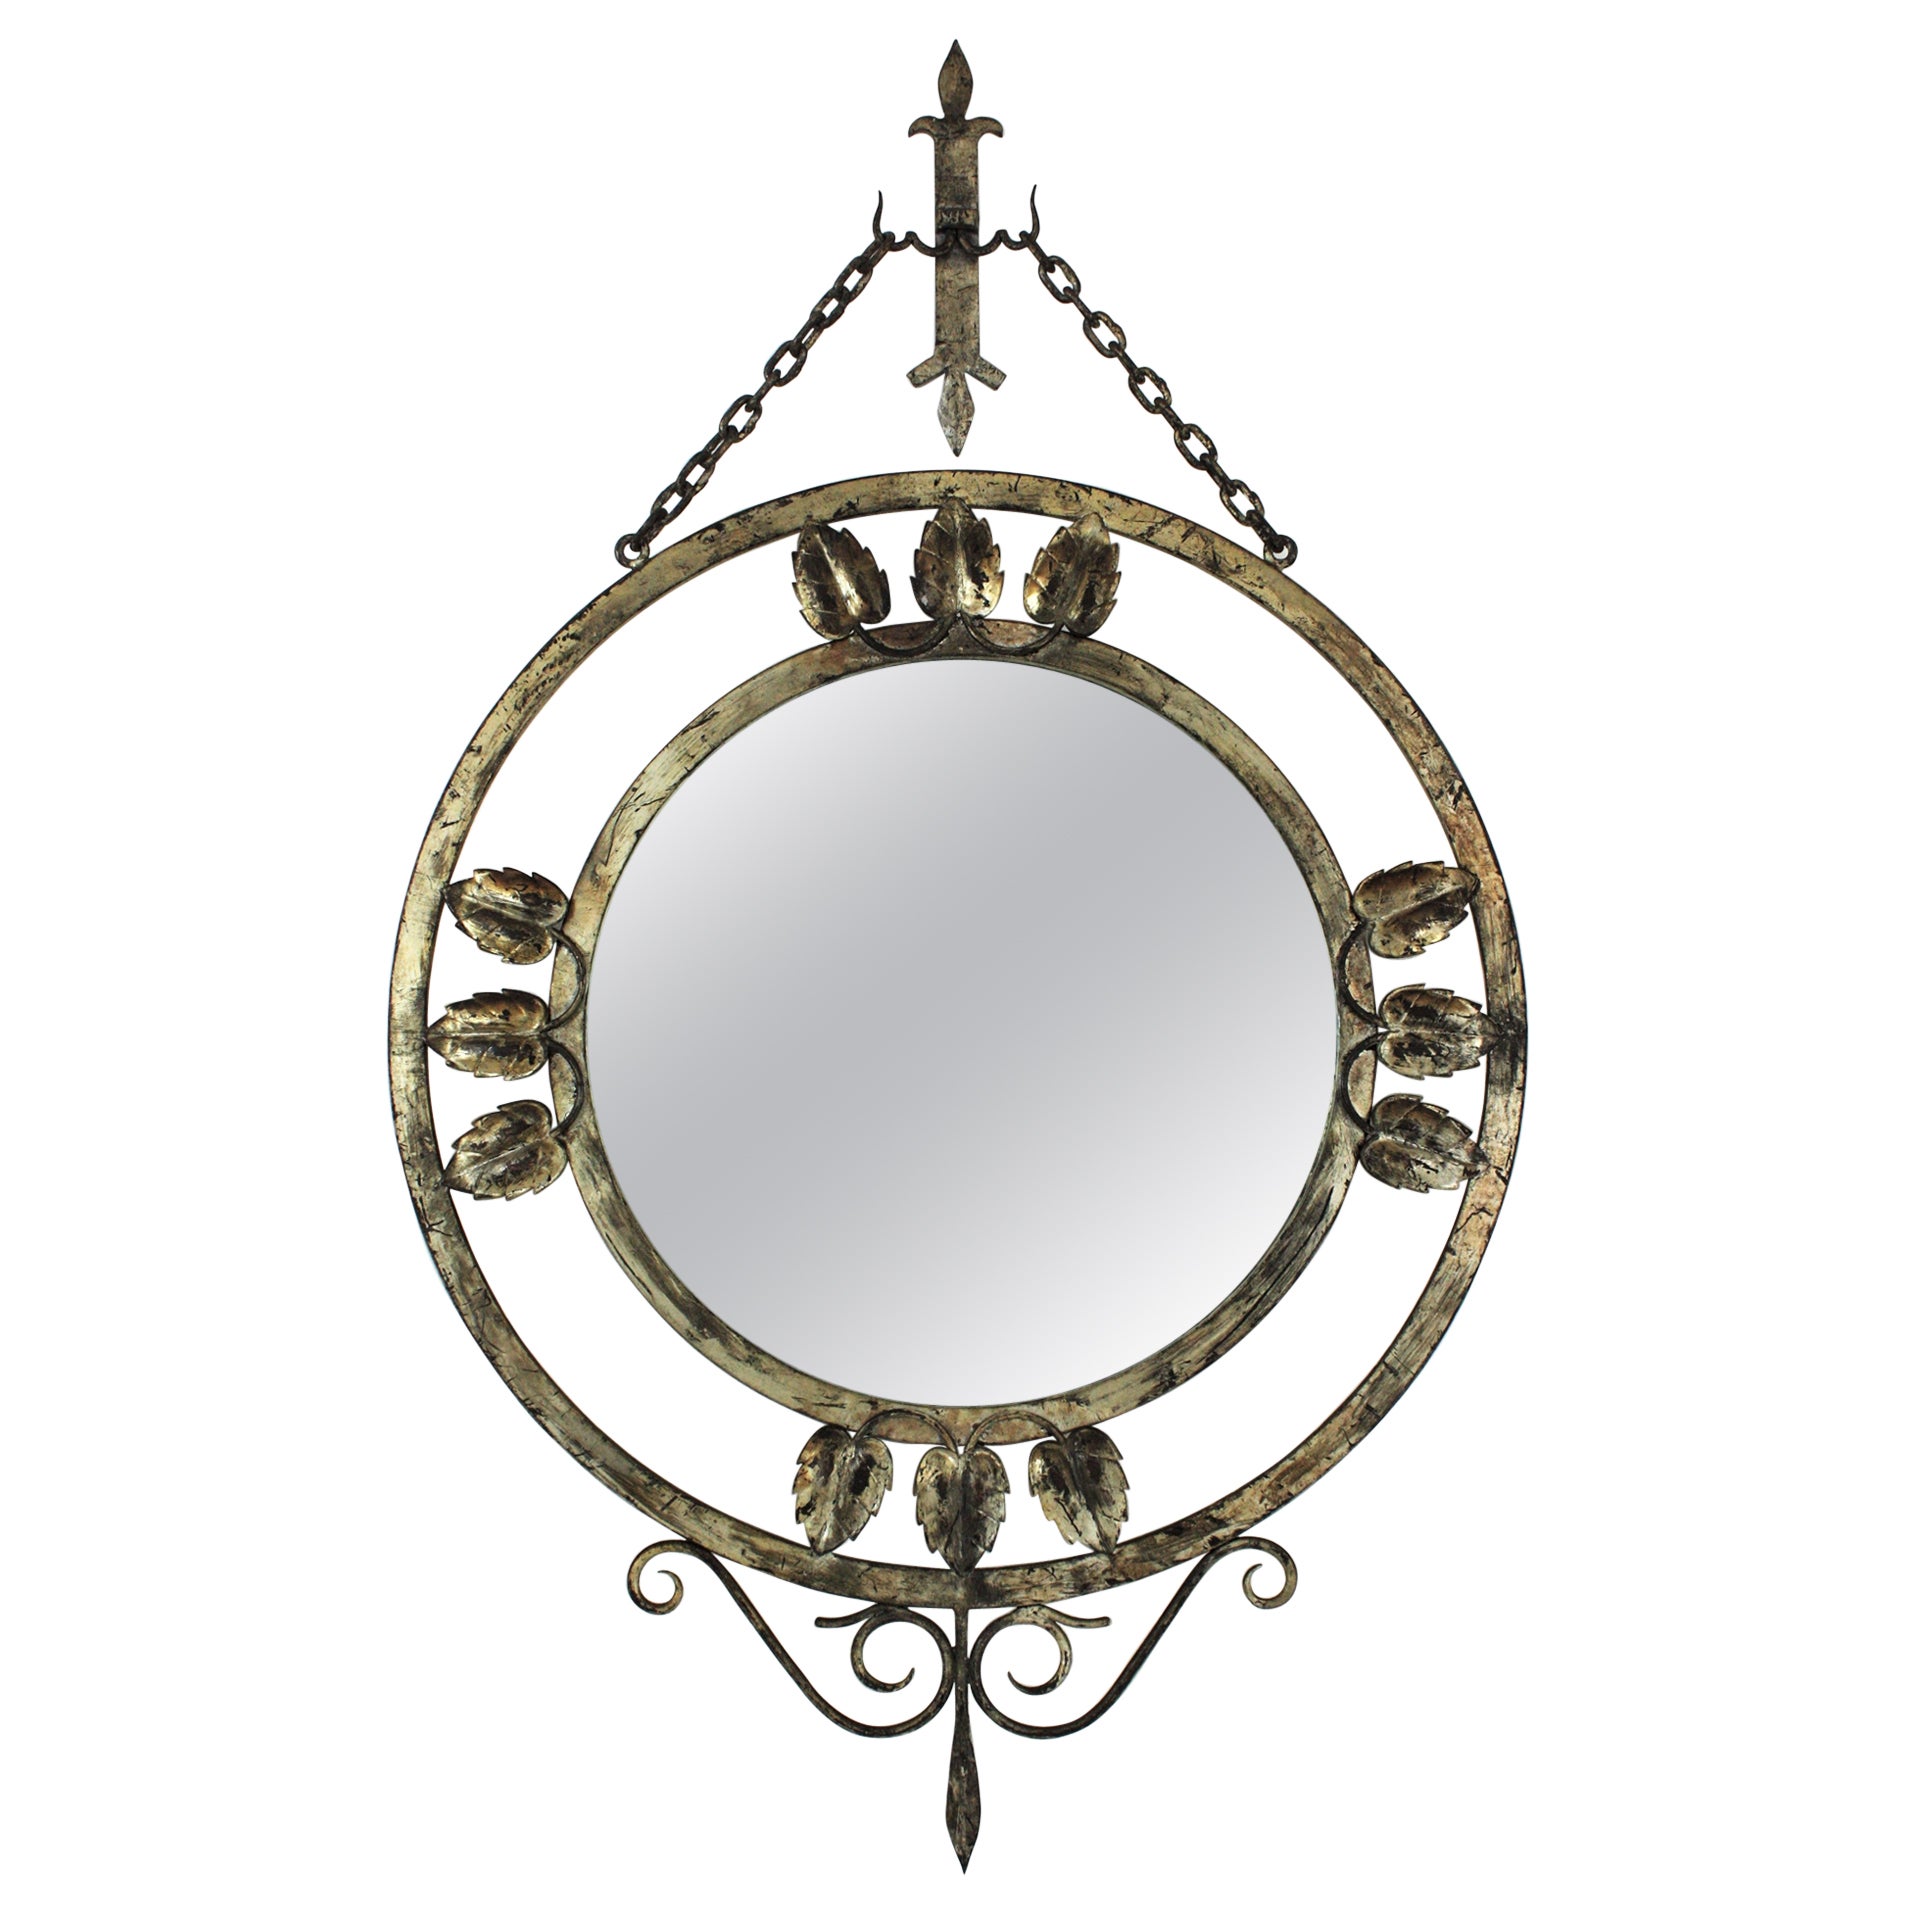 Gilt Silvered Wall Mirror with Foliage Details, Hand Forged Iron, France, 1940s